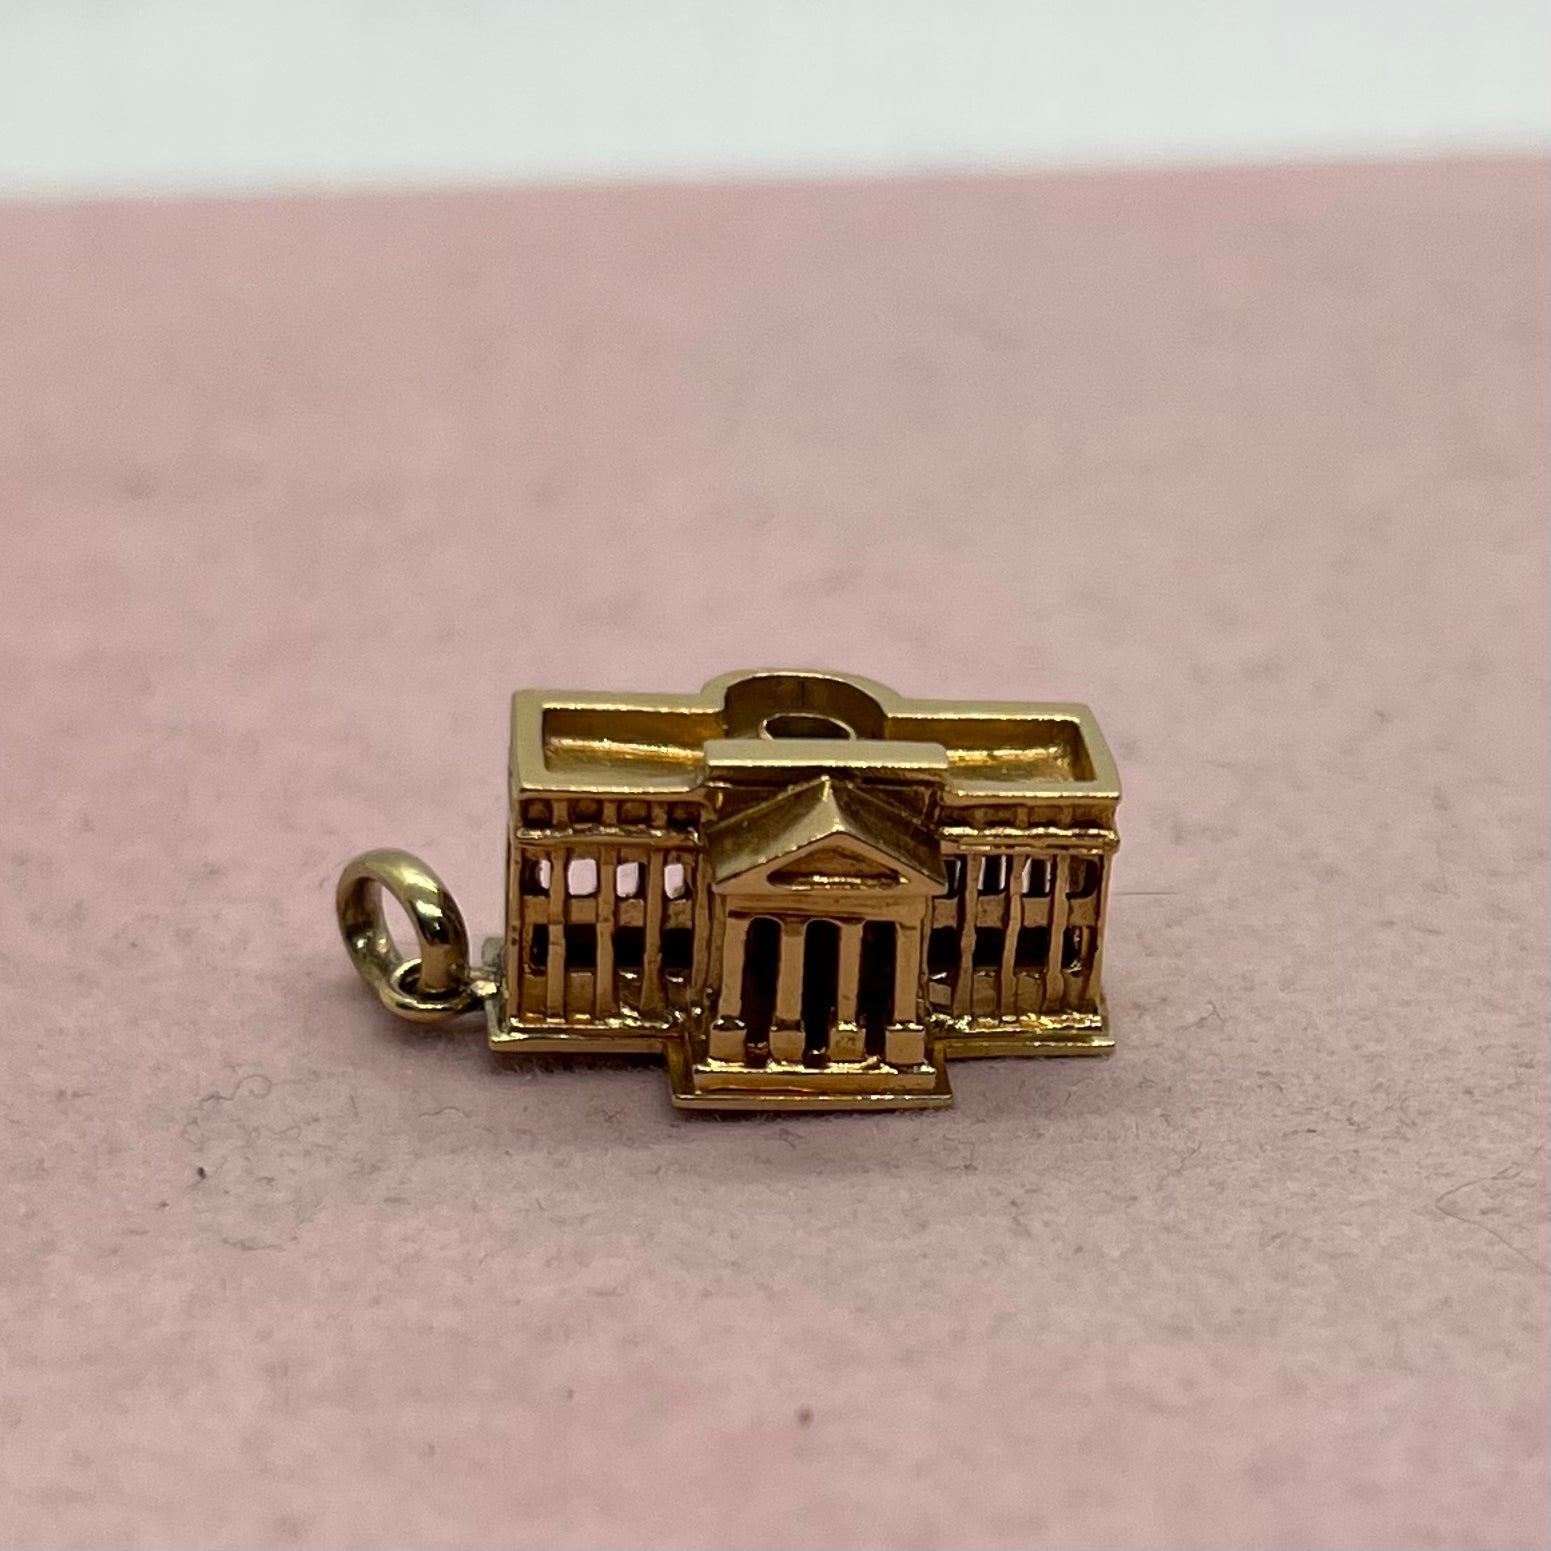 White House Pendant With Stanhope Lens and Microphotograph of DC Monuments